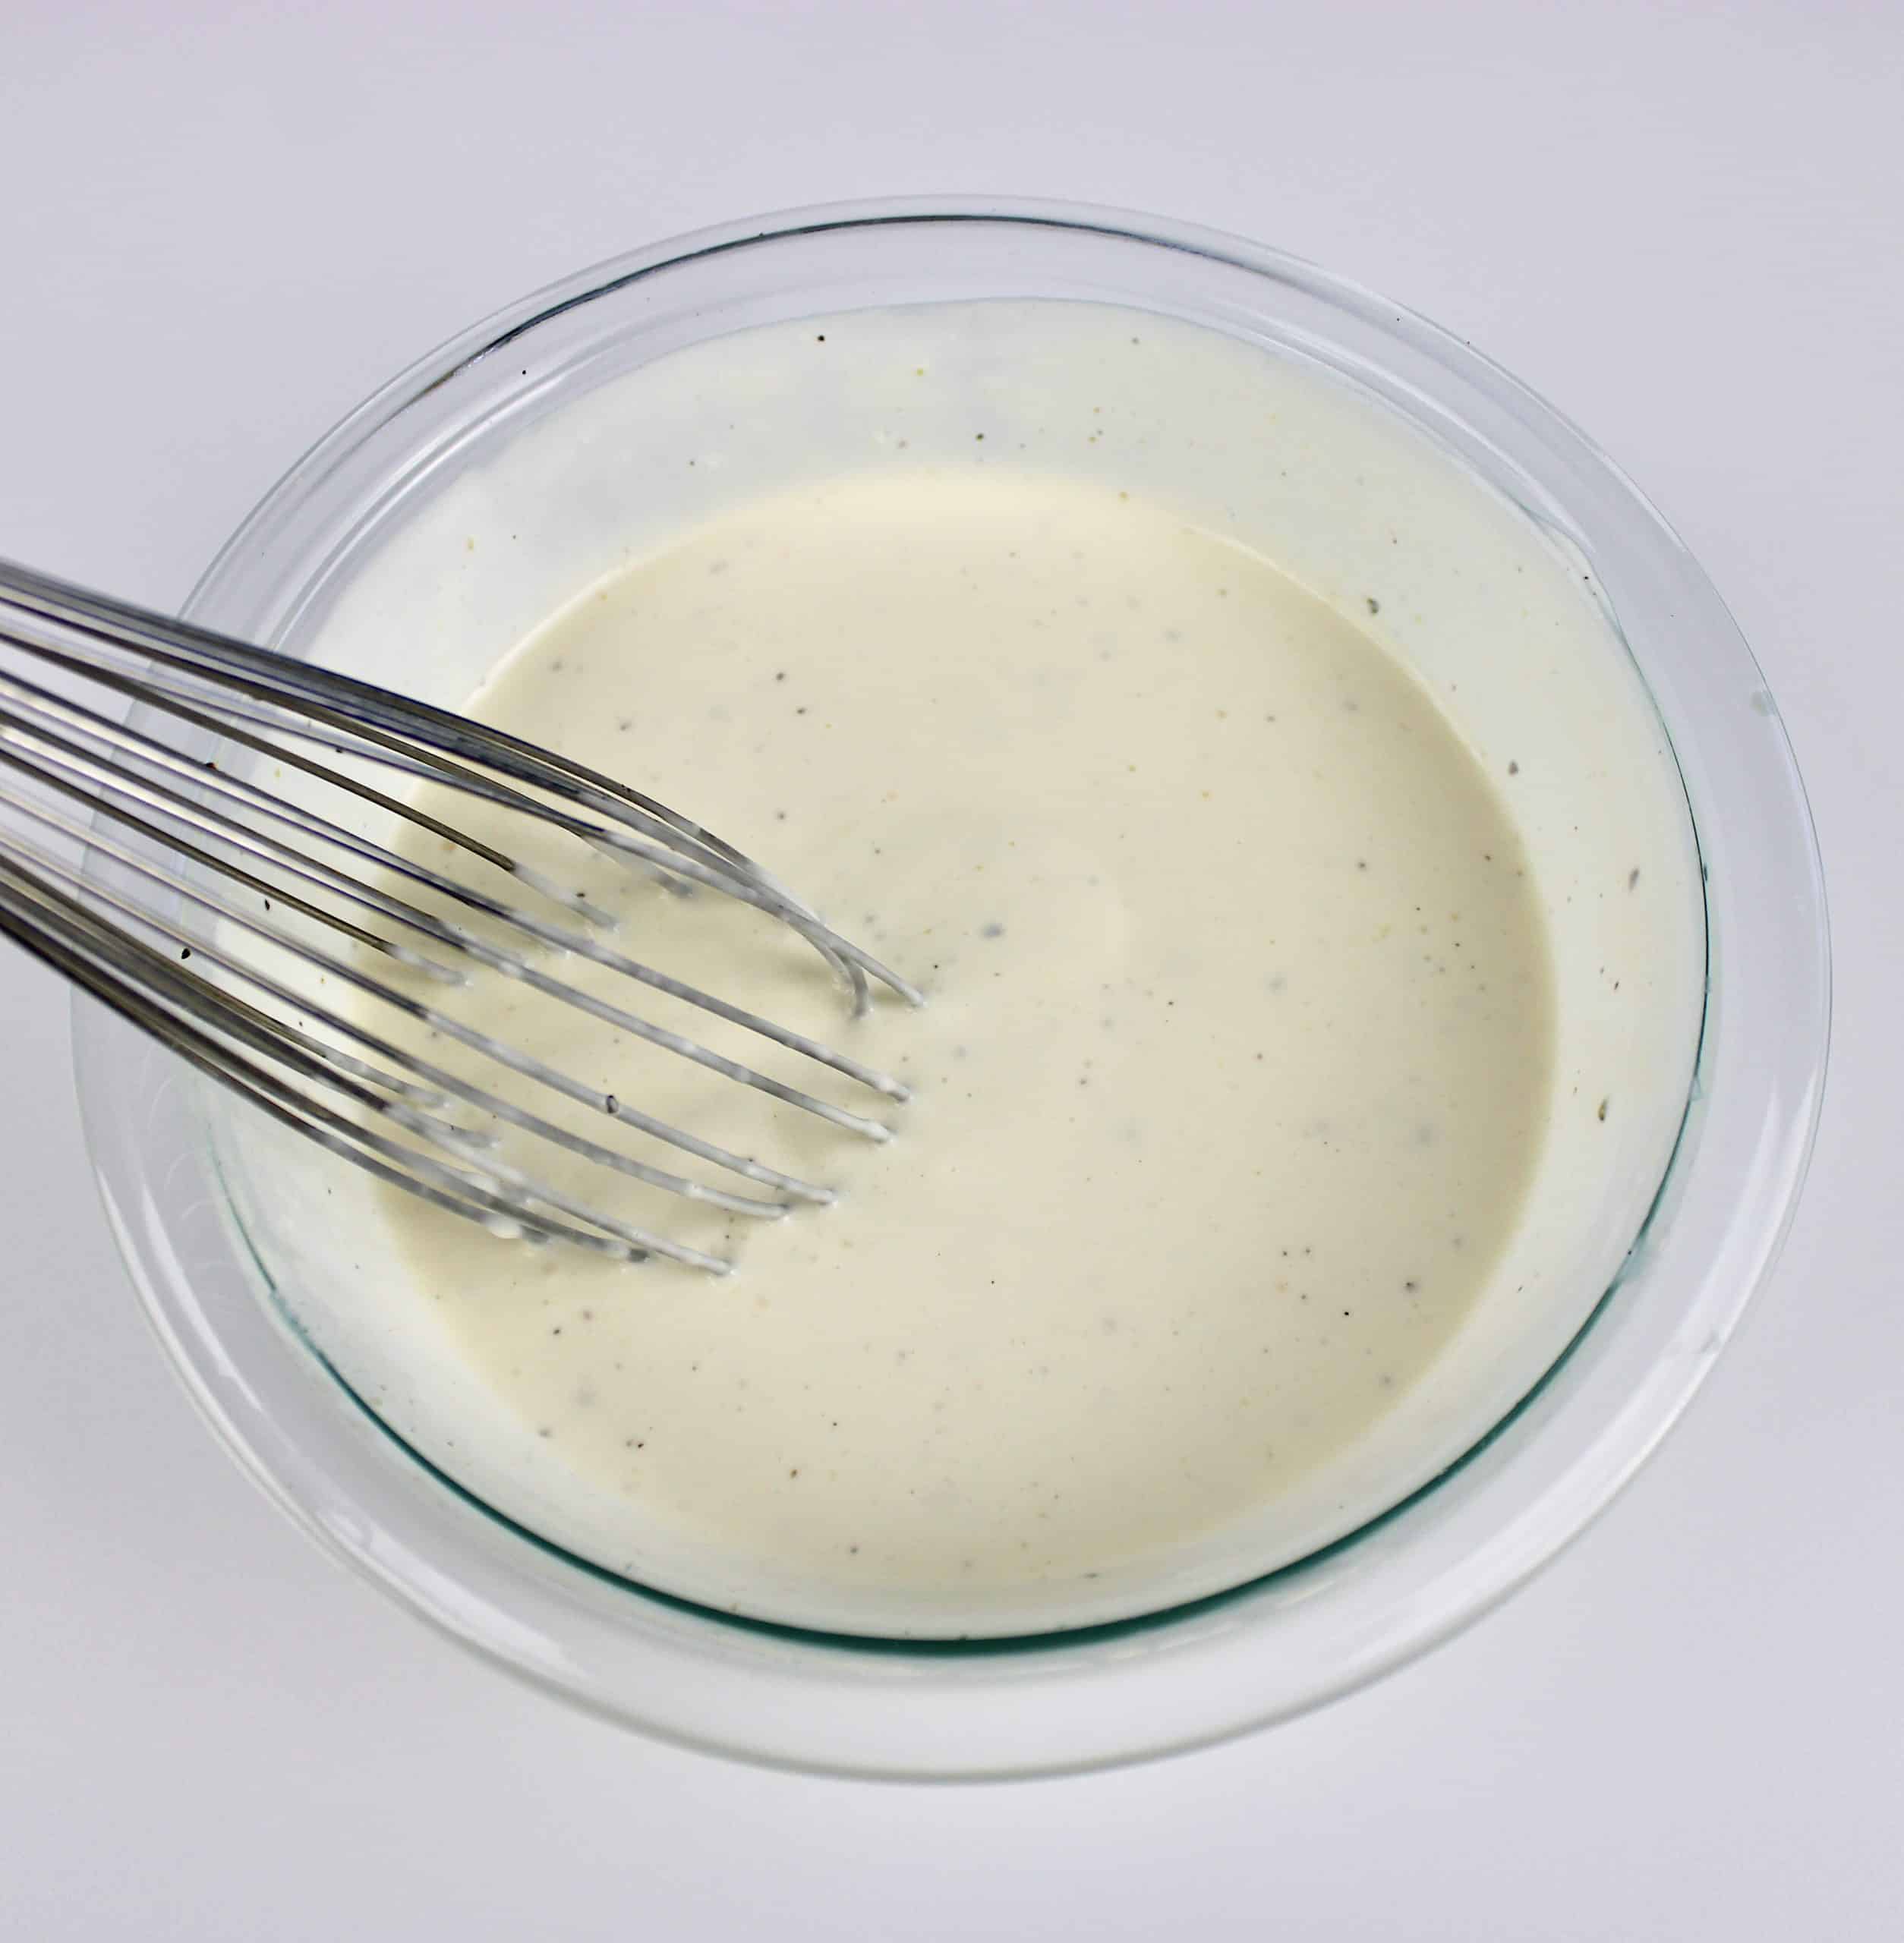 Broccoli Cauliflower Salad dressing in glass bowl with whisk